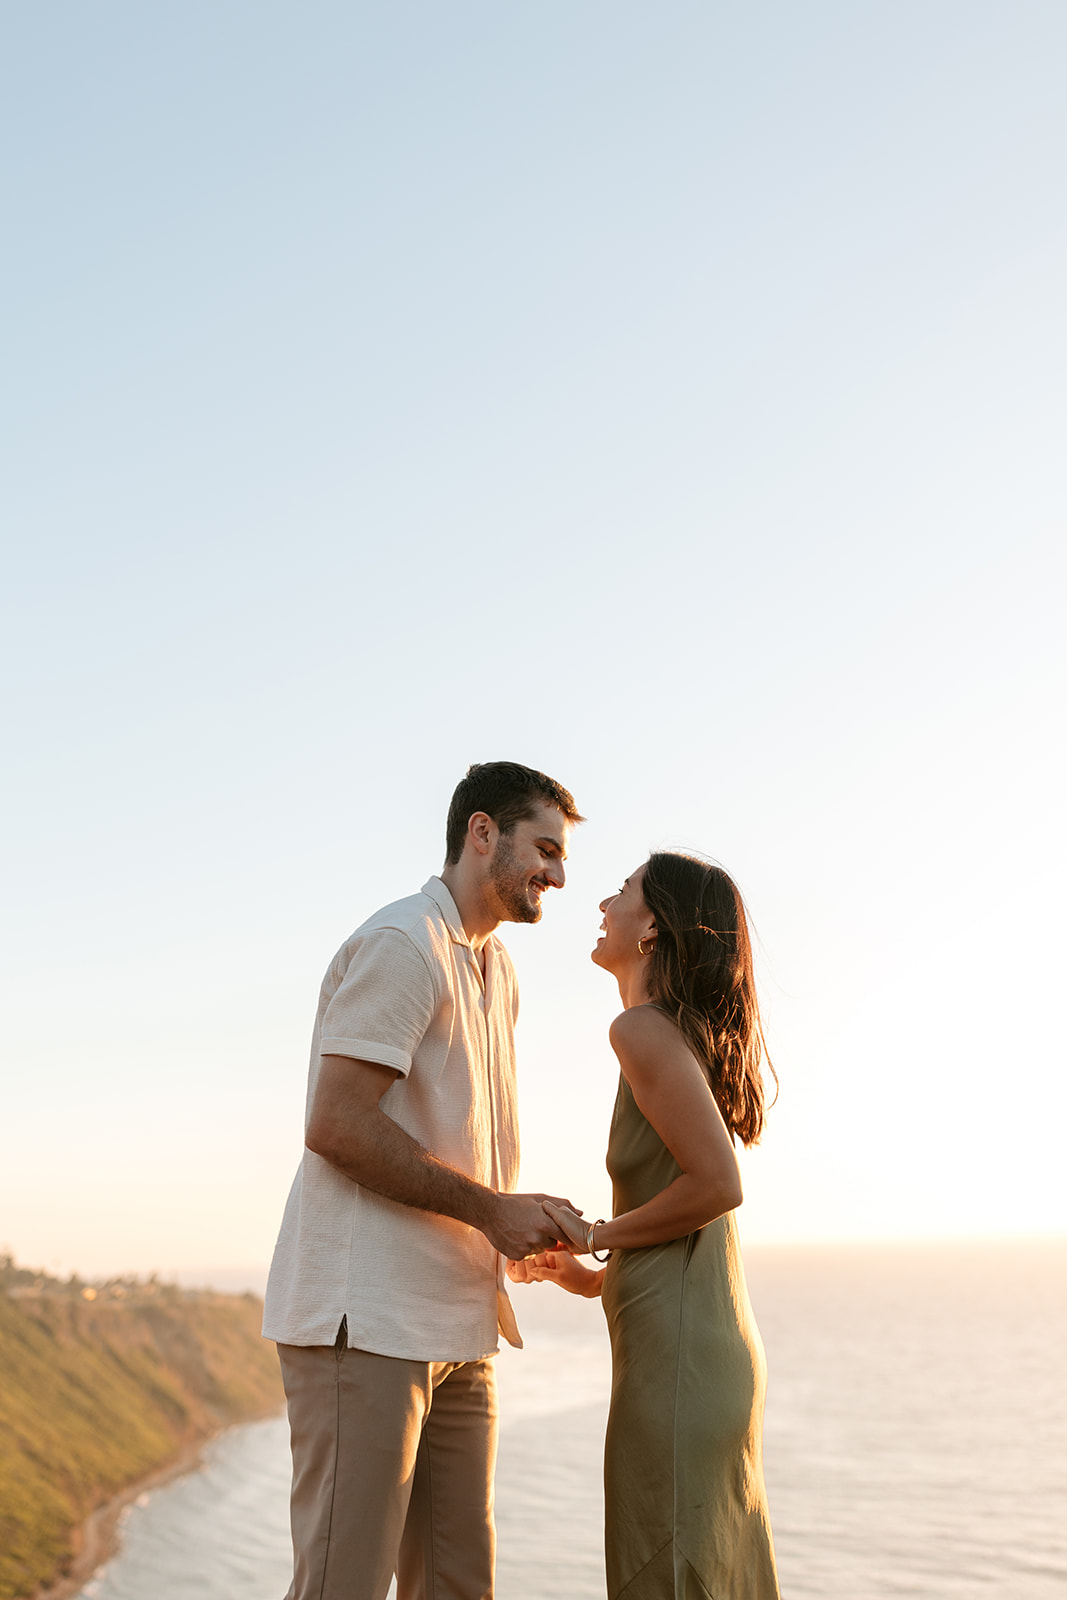 cliffside proposal engagement session palos verdes california socal  photography ideas couples poses ideas outfits